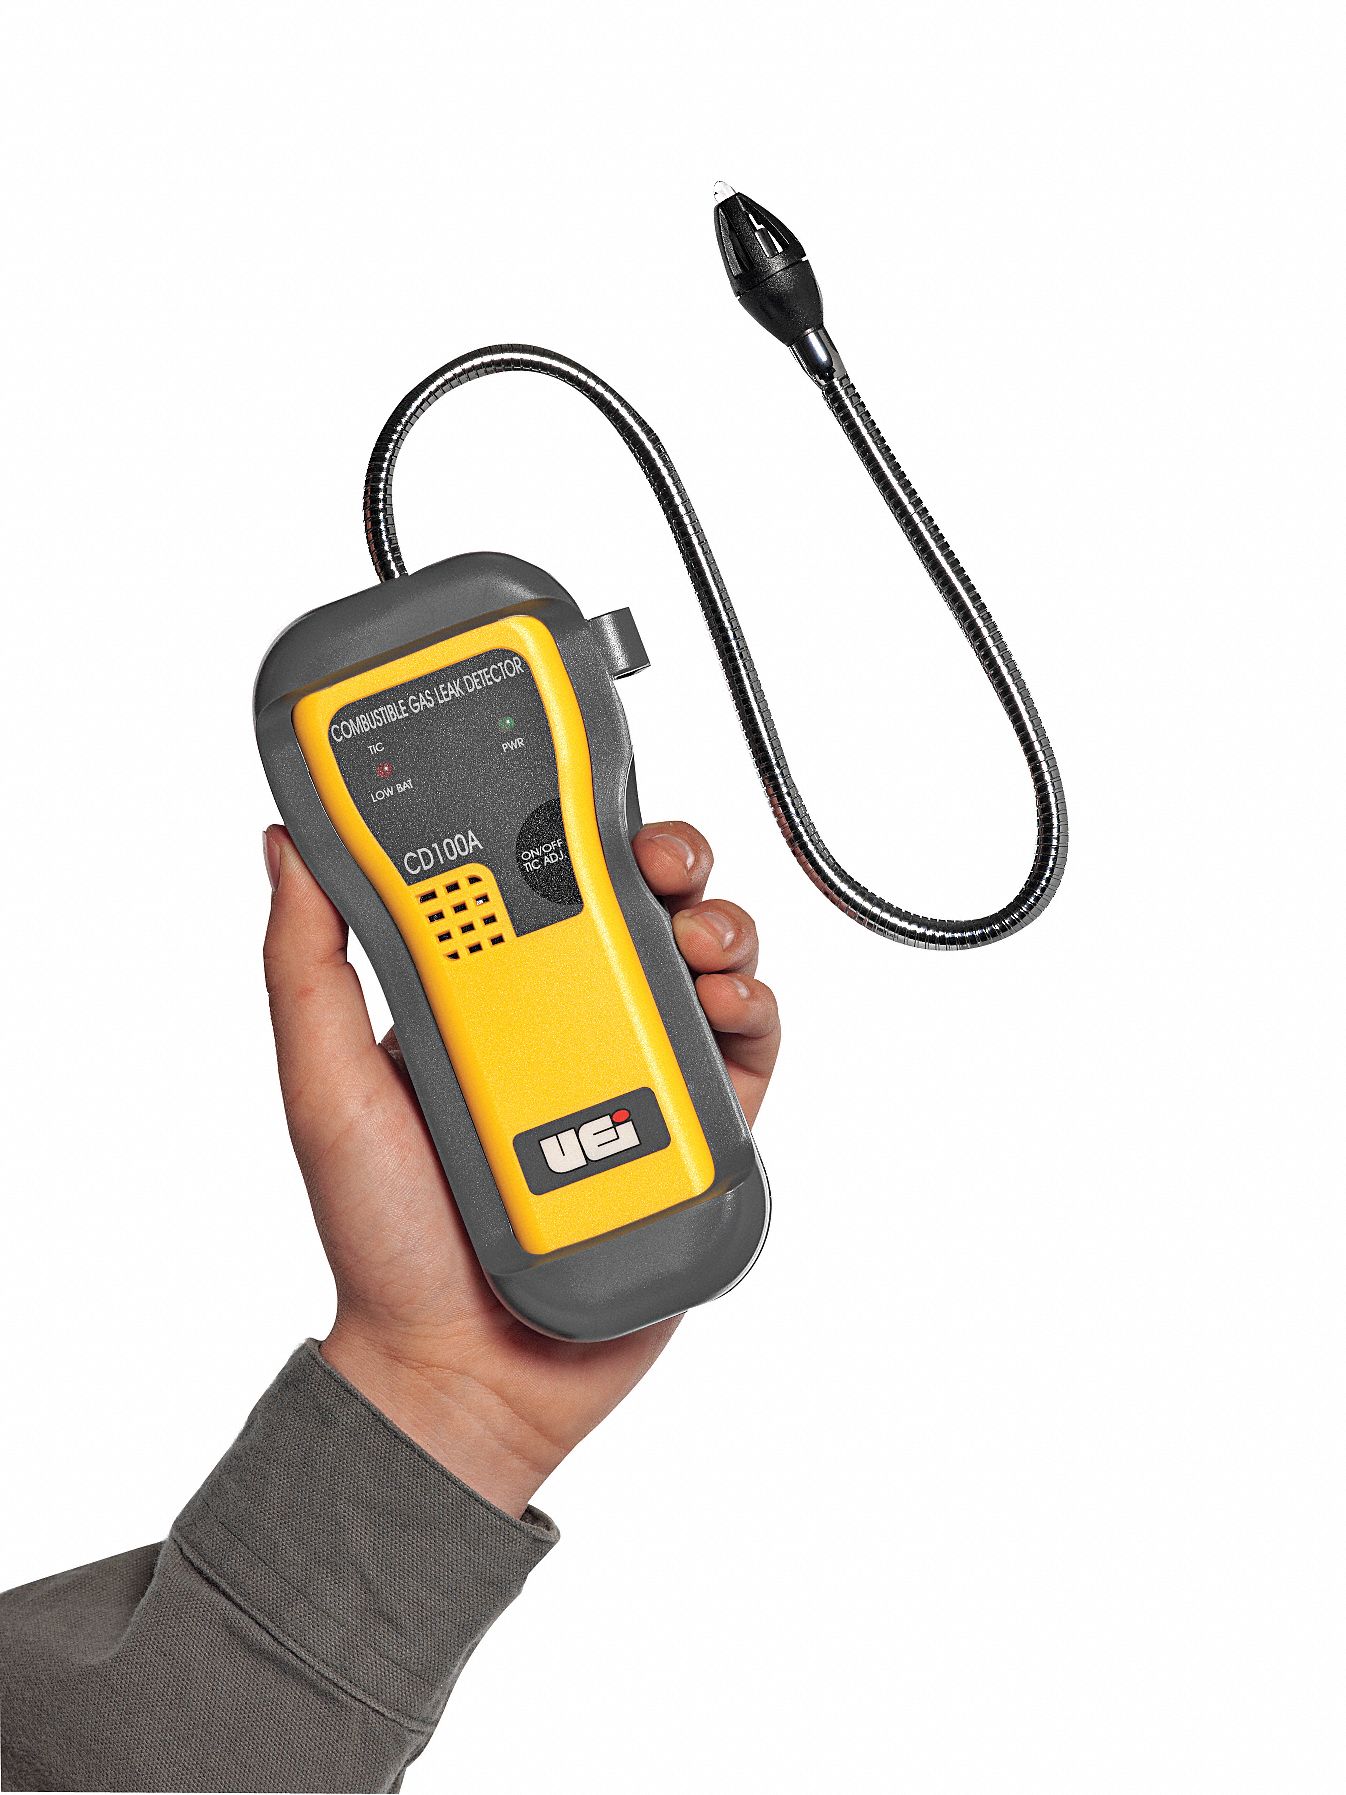 Uei CD100A - Combustible GAS Leak Detector